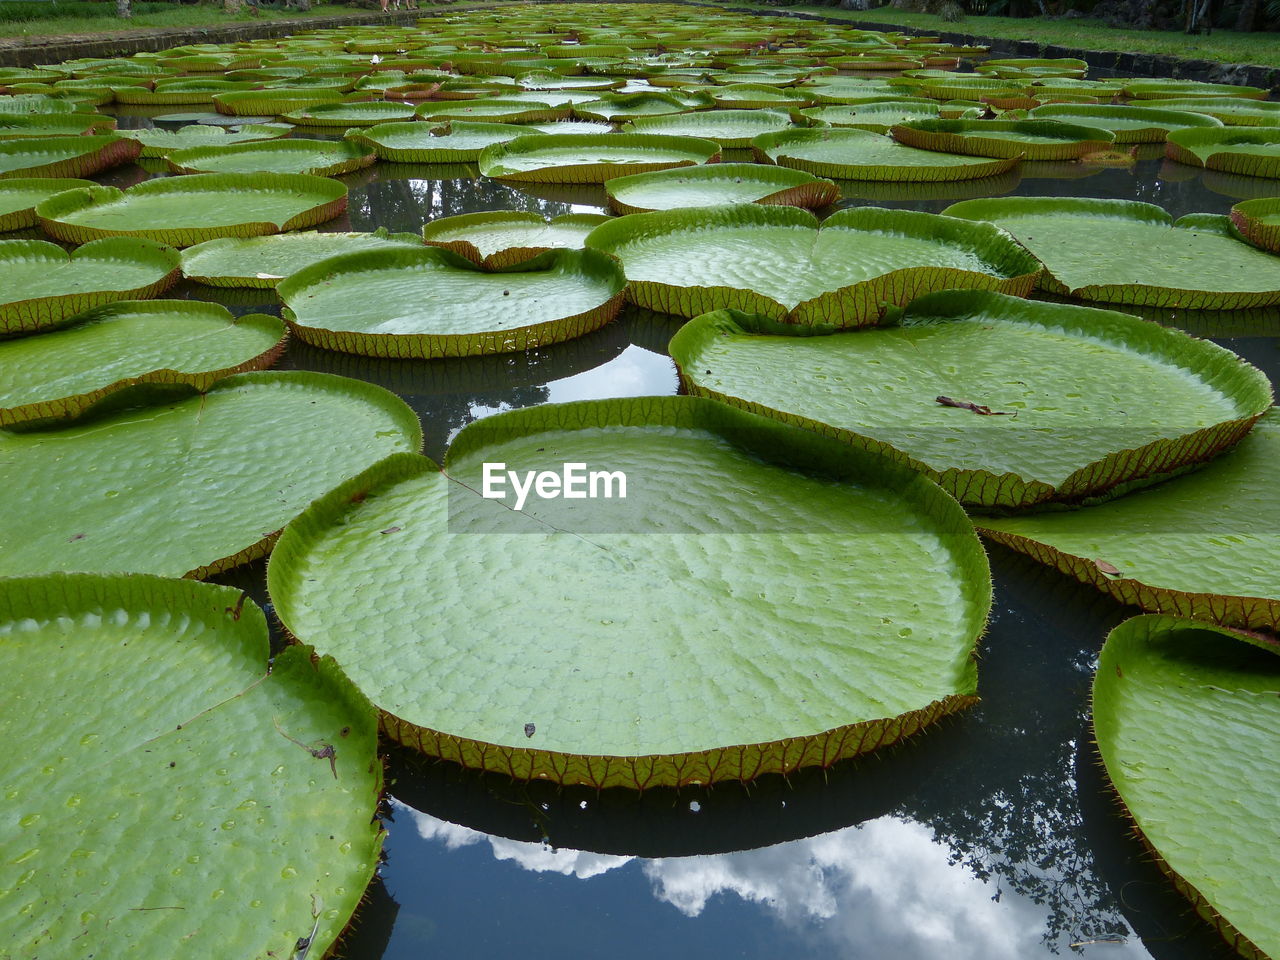 CLOSE-UP OF LOTUS WATER LILY FLOATING ON POND